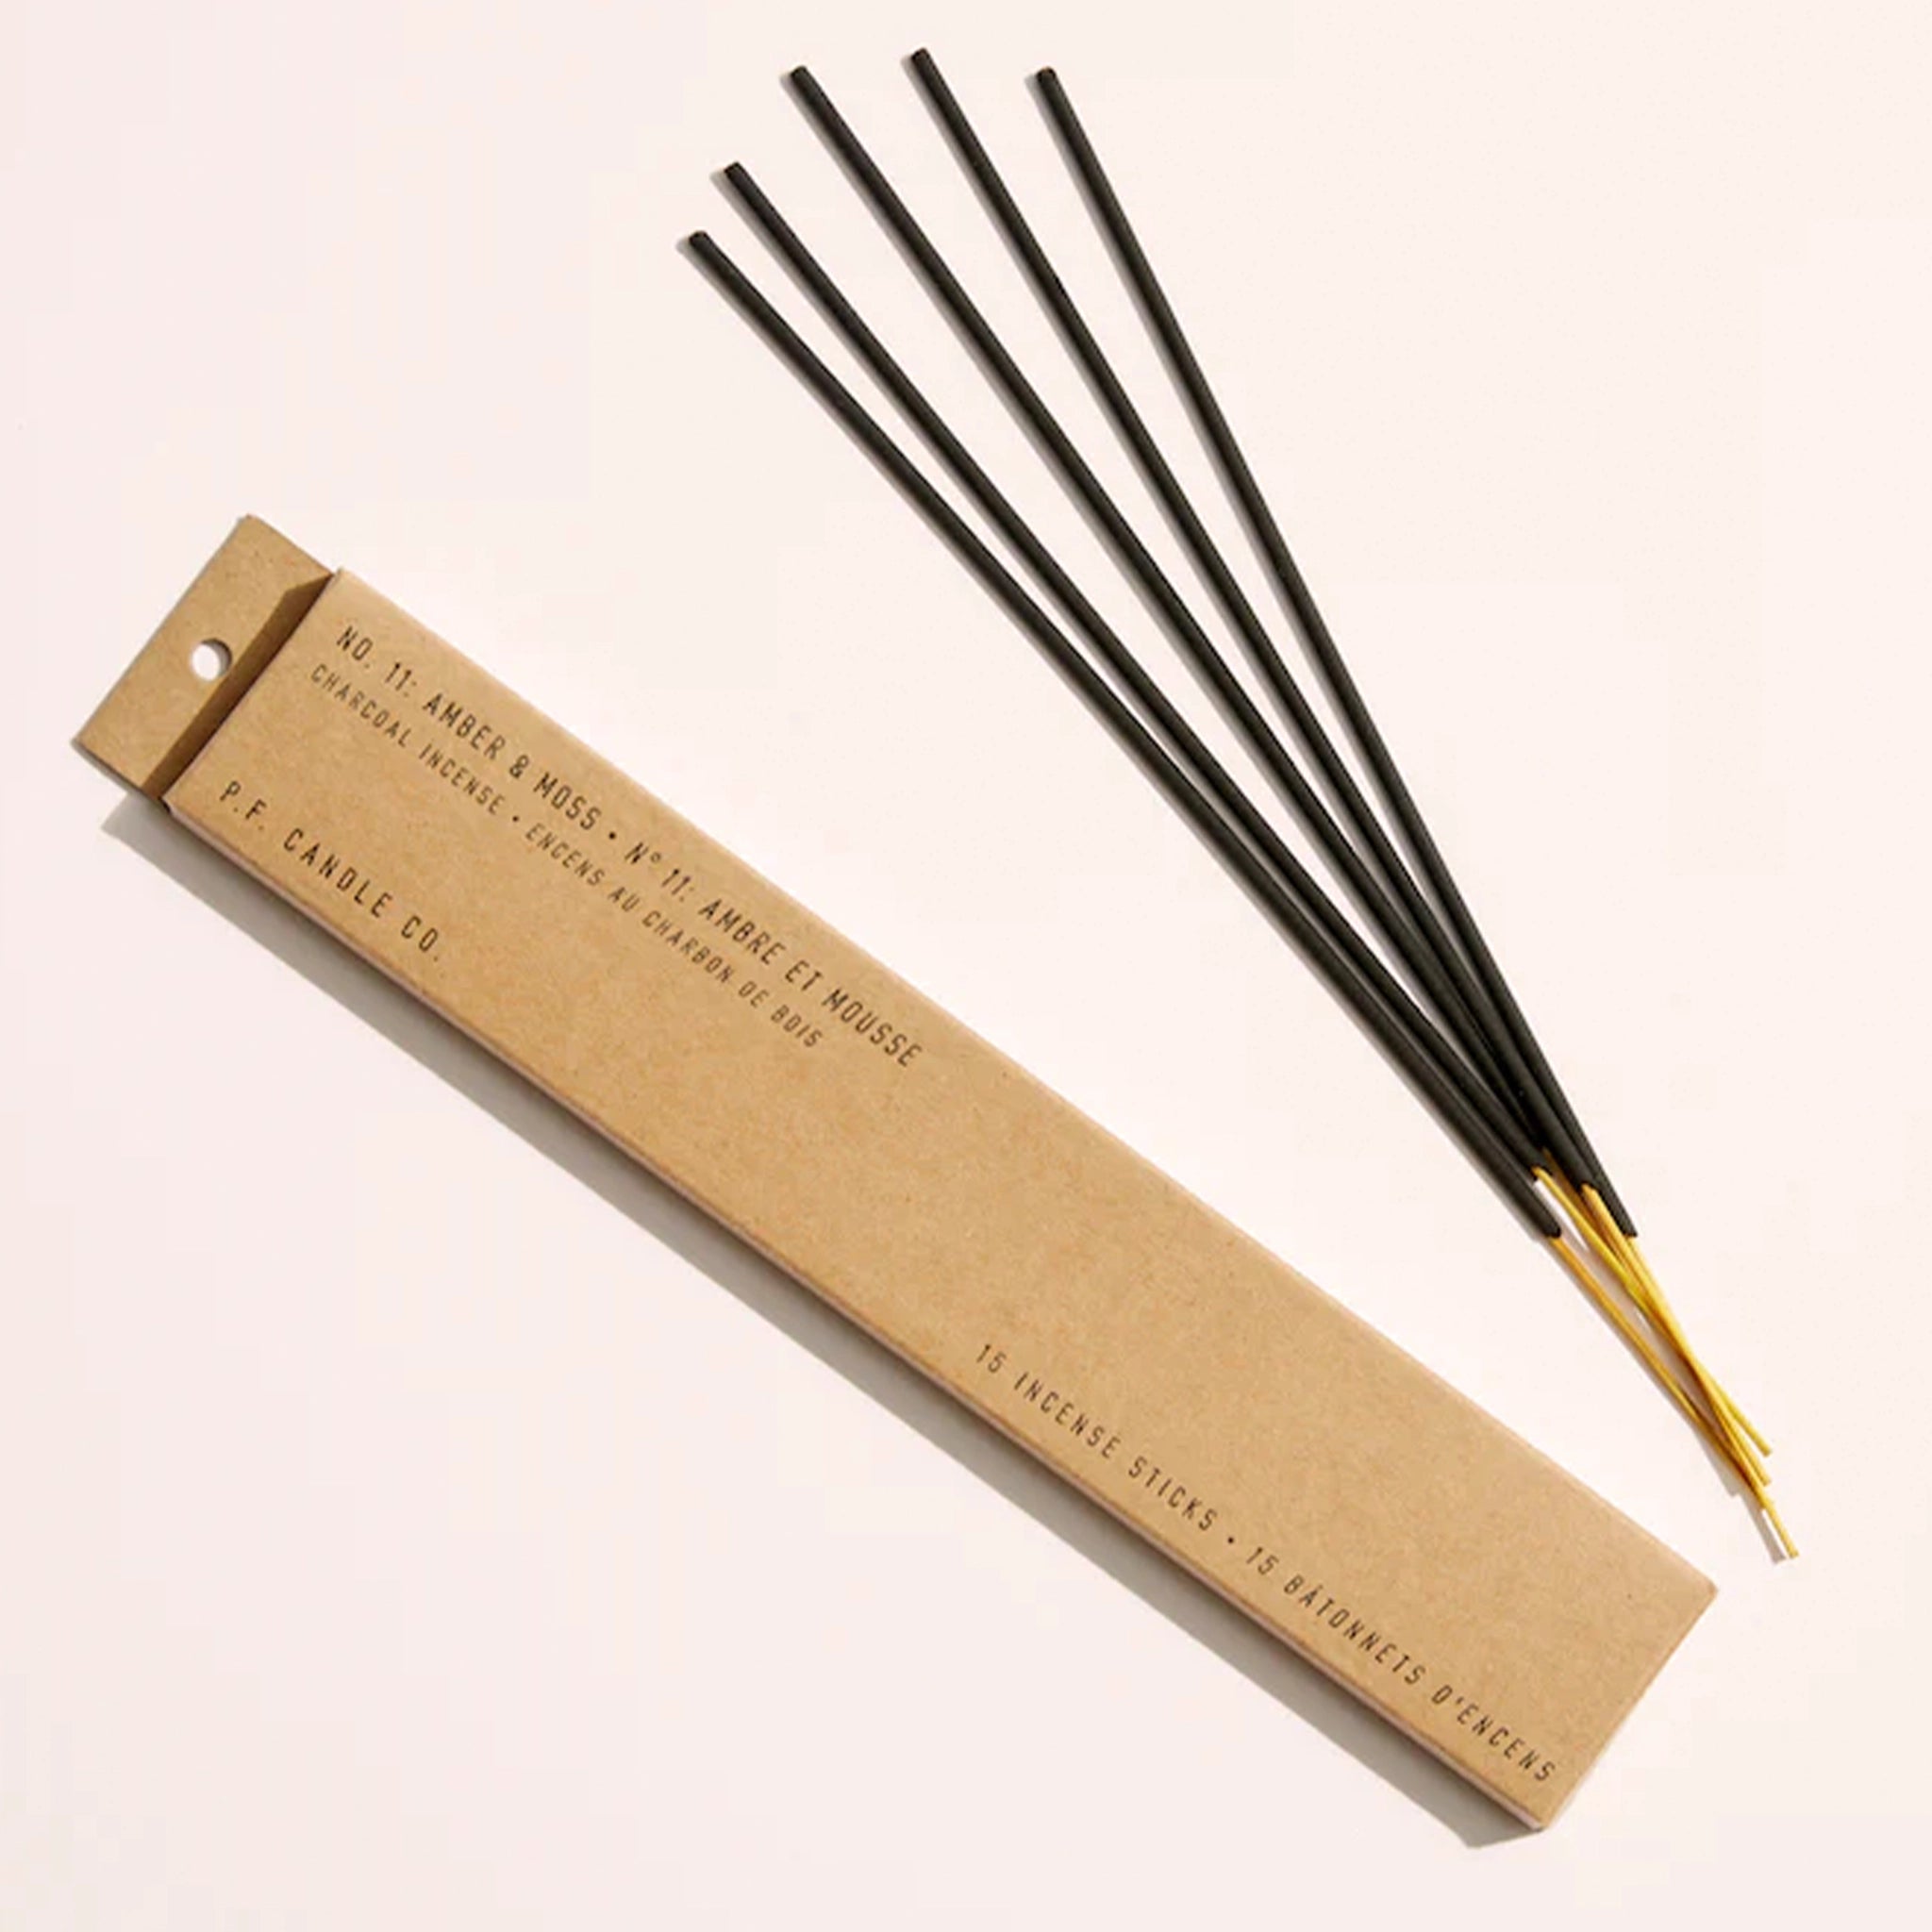 A cardboard package with 5 incense sticks with black ties and exposed natural wood ends along with black text on the box that reads, "Amber & Moss Charcoal Incense".